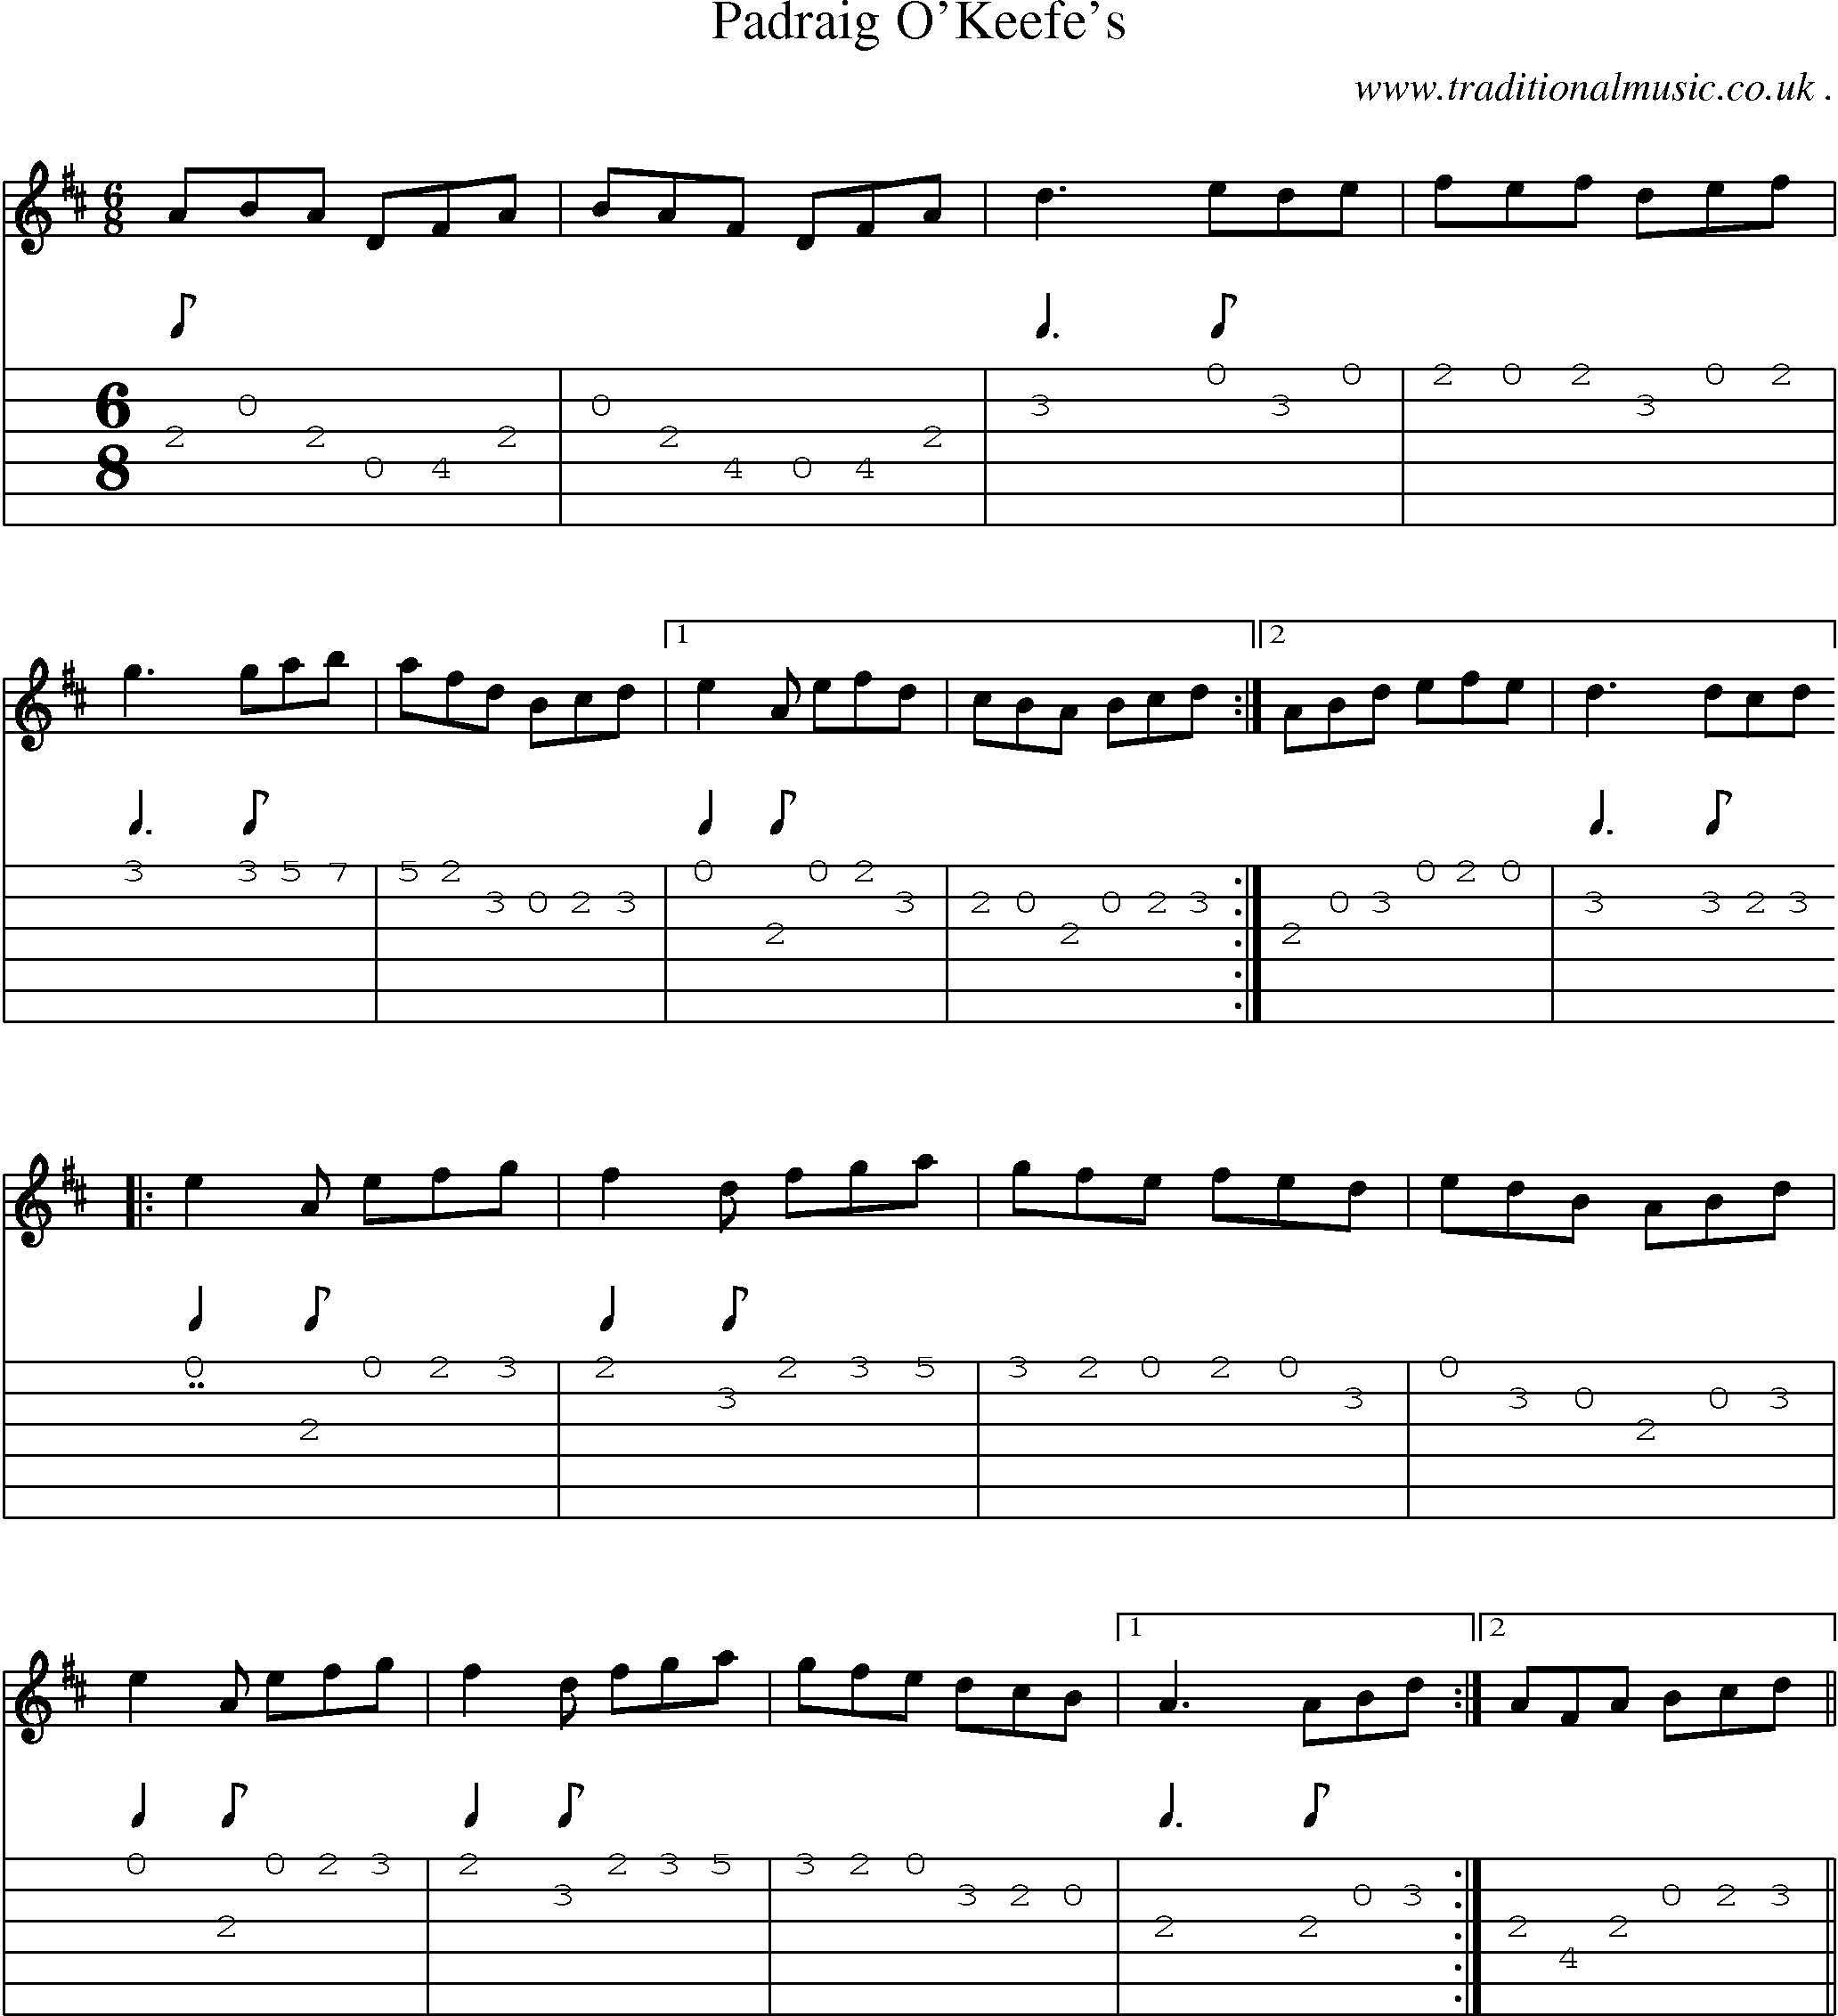 Sheet-Music and Guitar Tabs for Padraig Okeefes